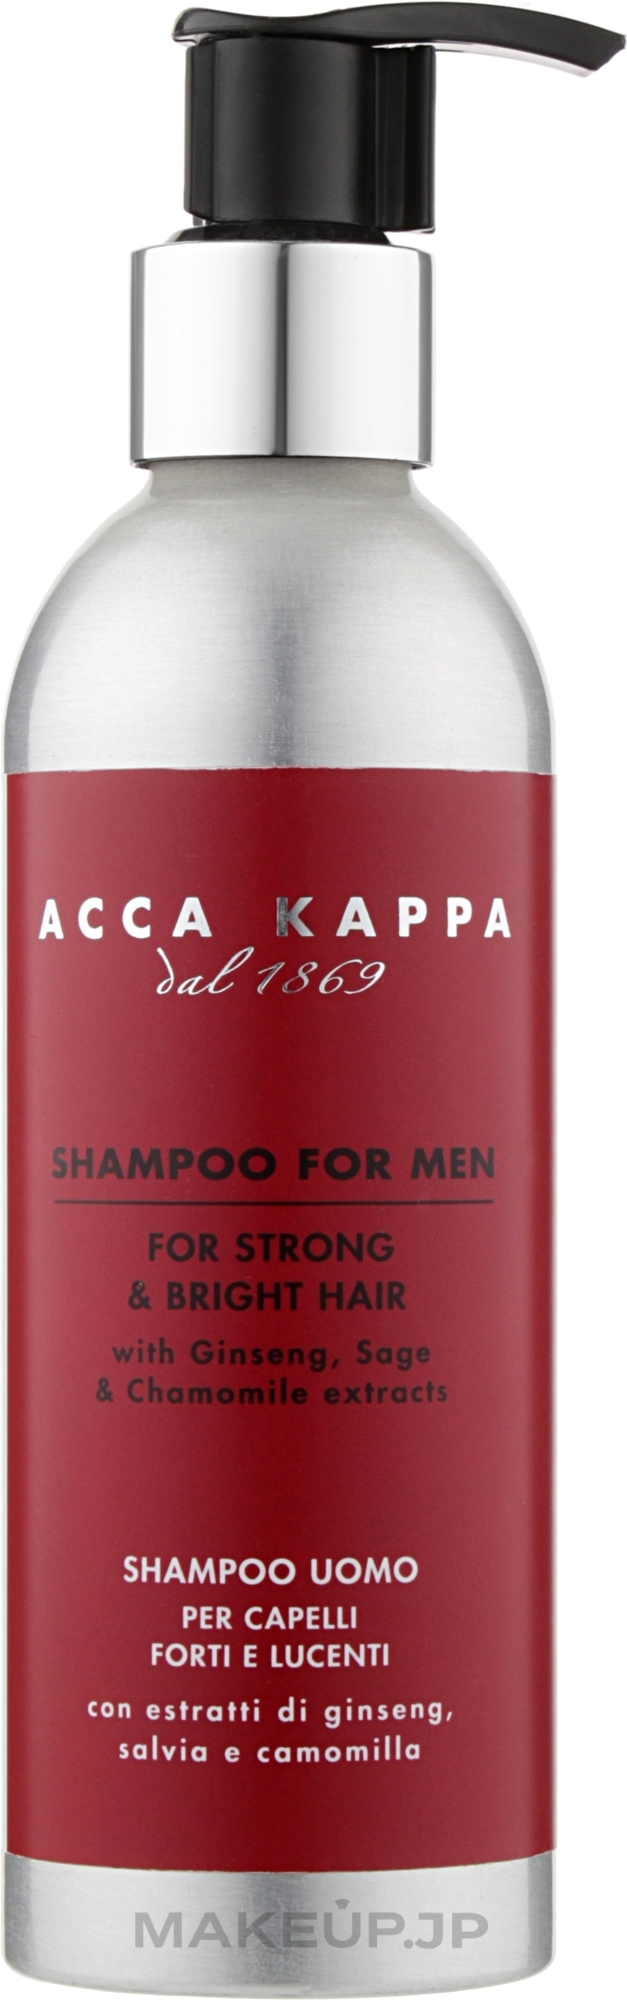 Men Shampoo for Blonde Hair - Acca Kappa Shampoo For Men For Strong & Bright Hair — photo 200 ml